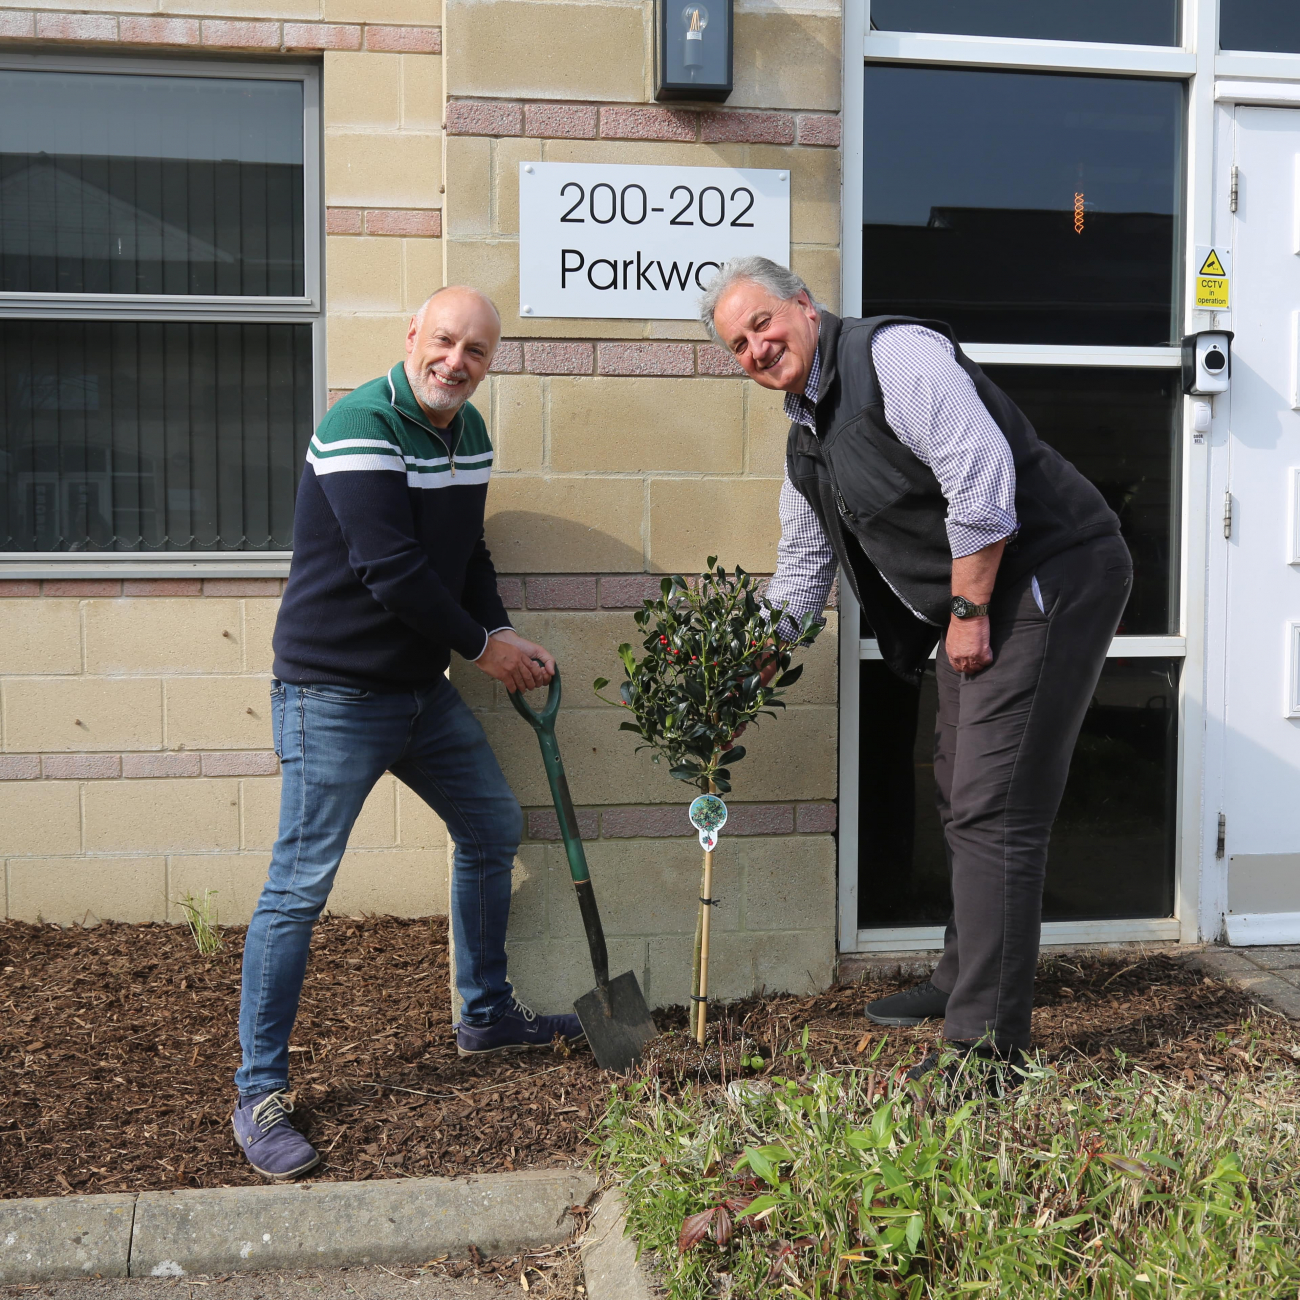 Ascot Group CEO Andrew Scott holding small freshly planted tree outside of Purplex Marketing building in weston-super-Mare next to weston college staff member Ian Porter